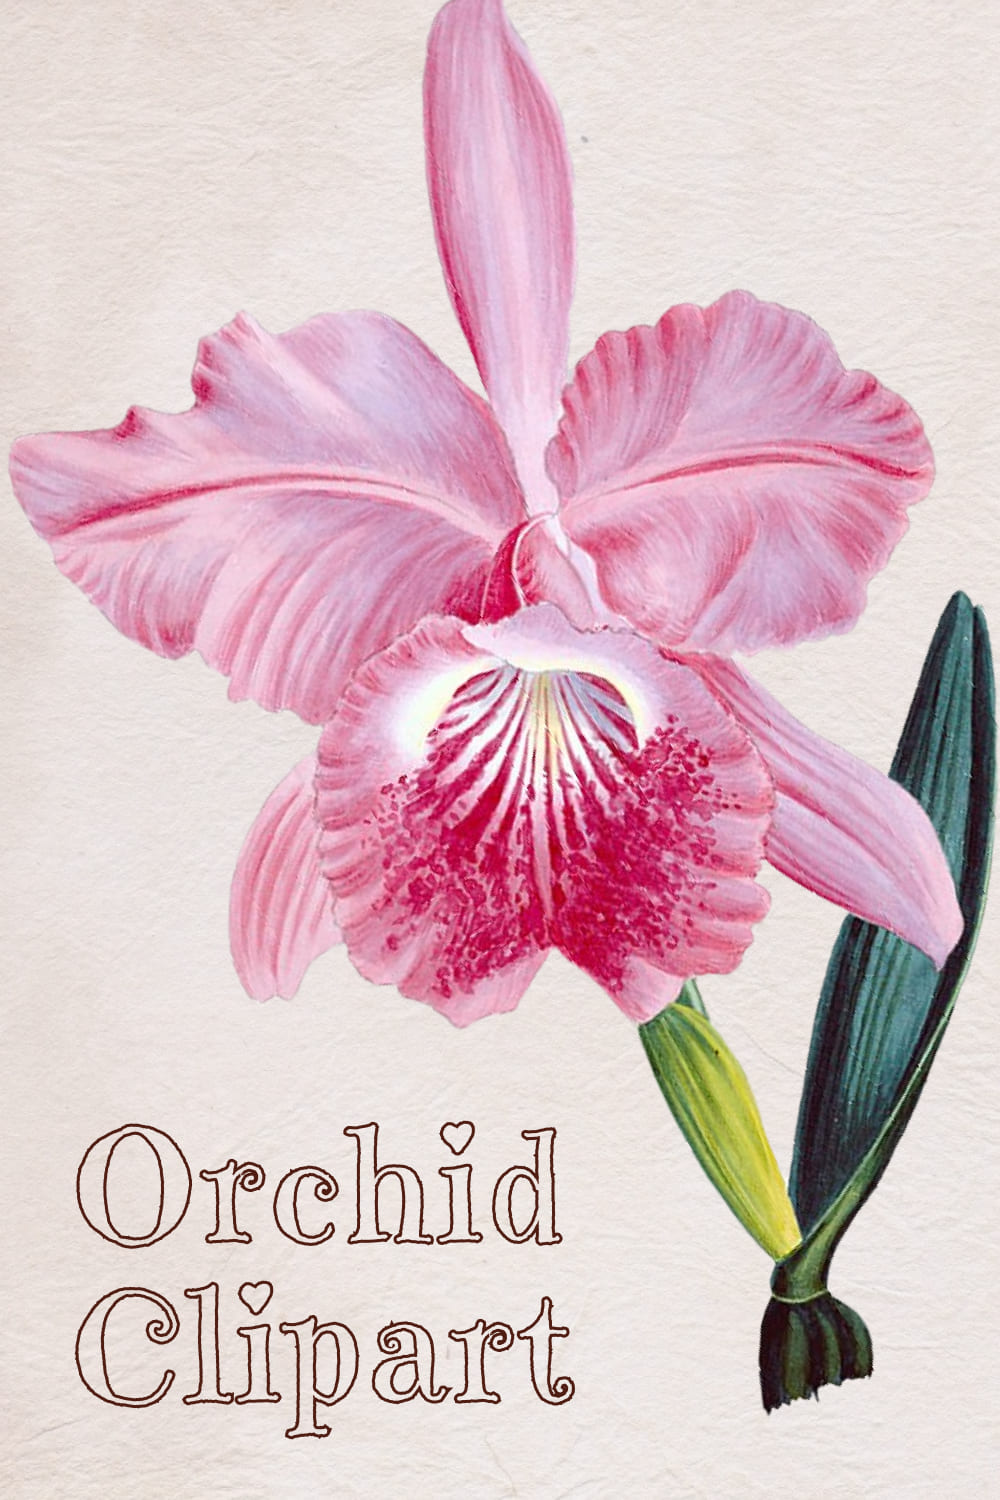 Orchid Clipart - preview image.